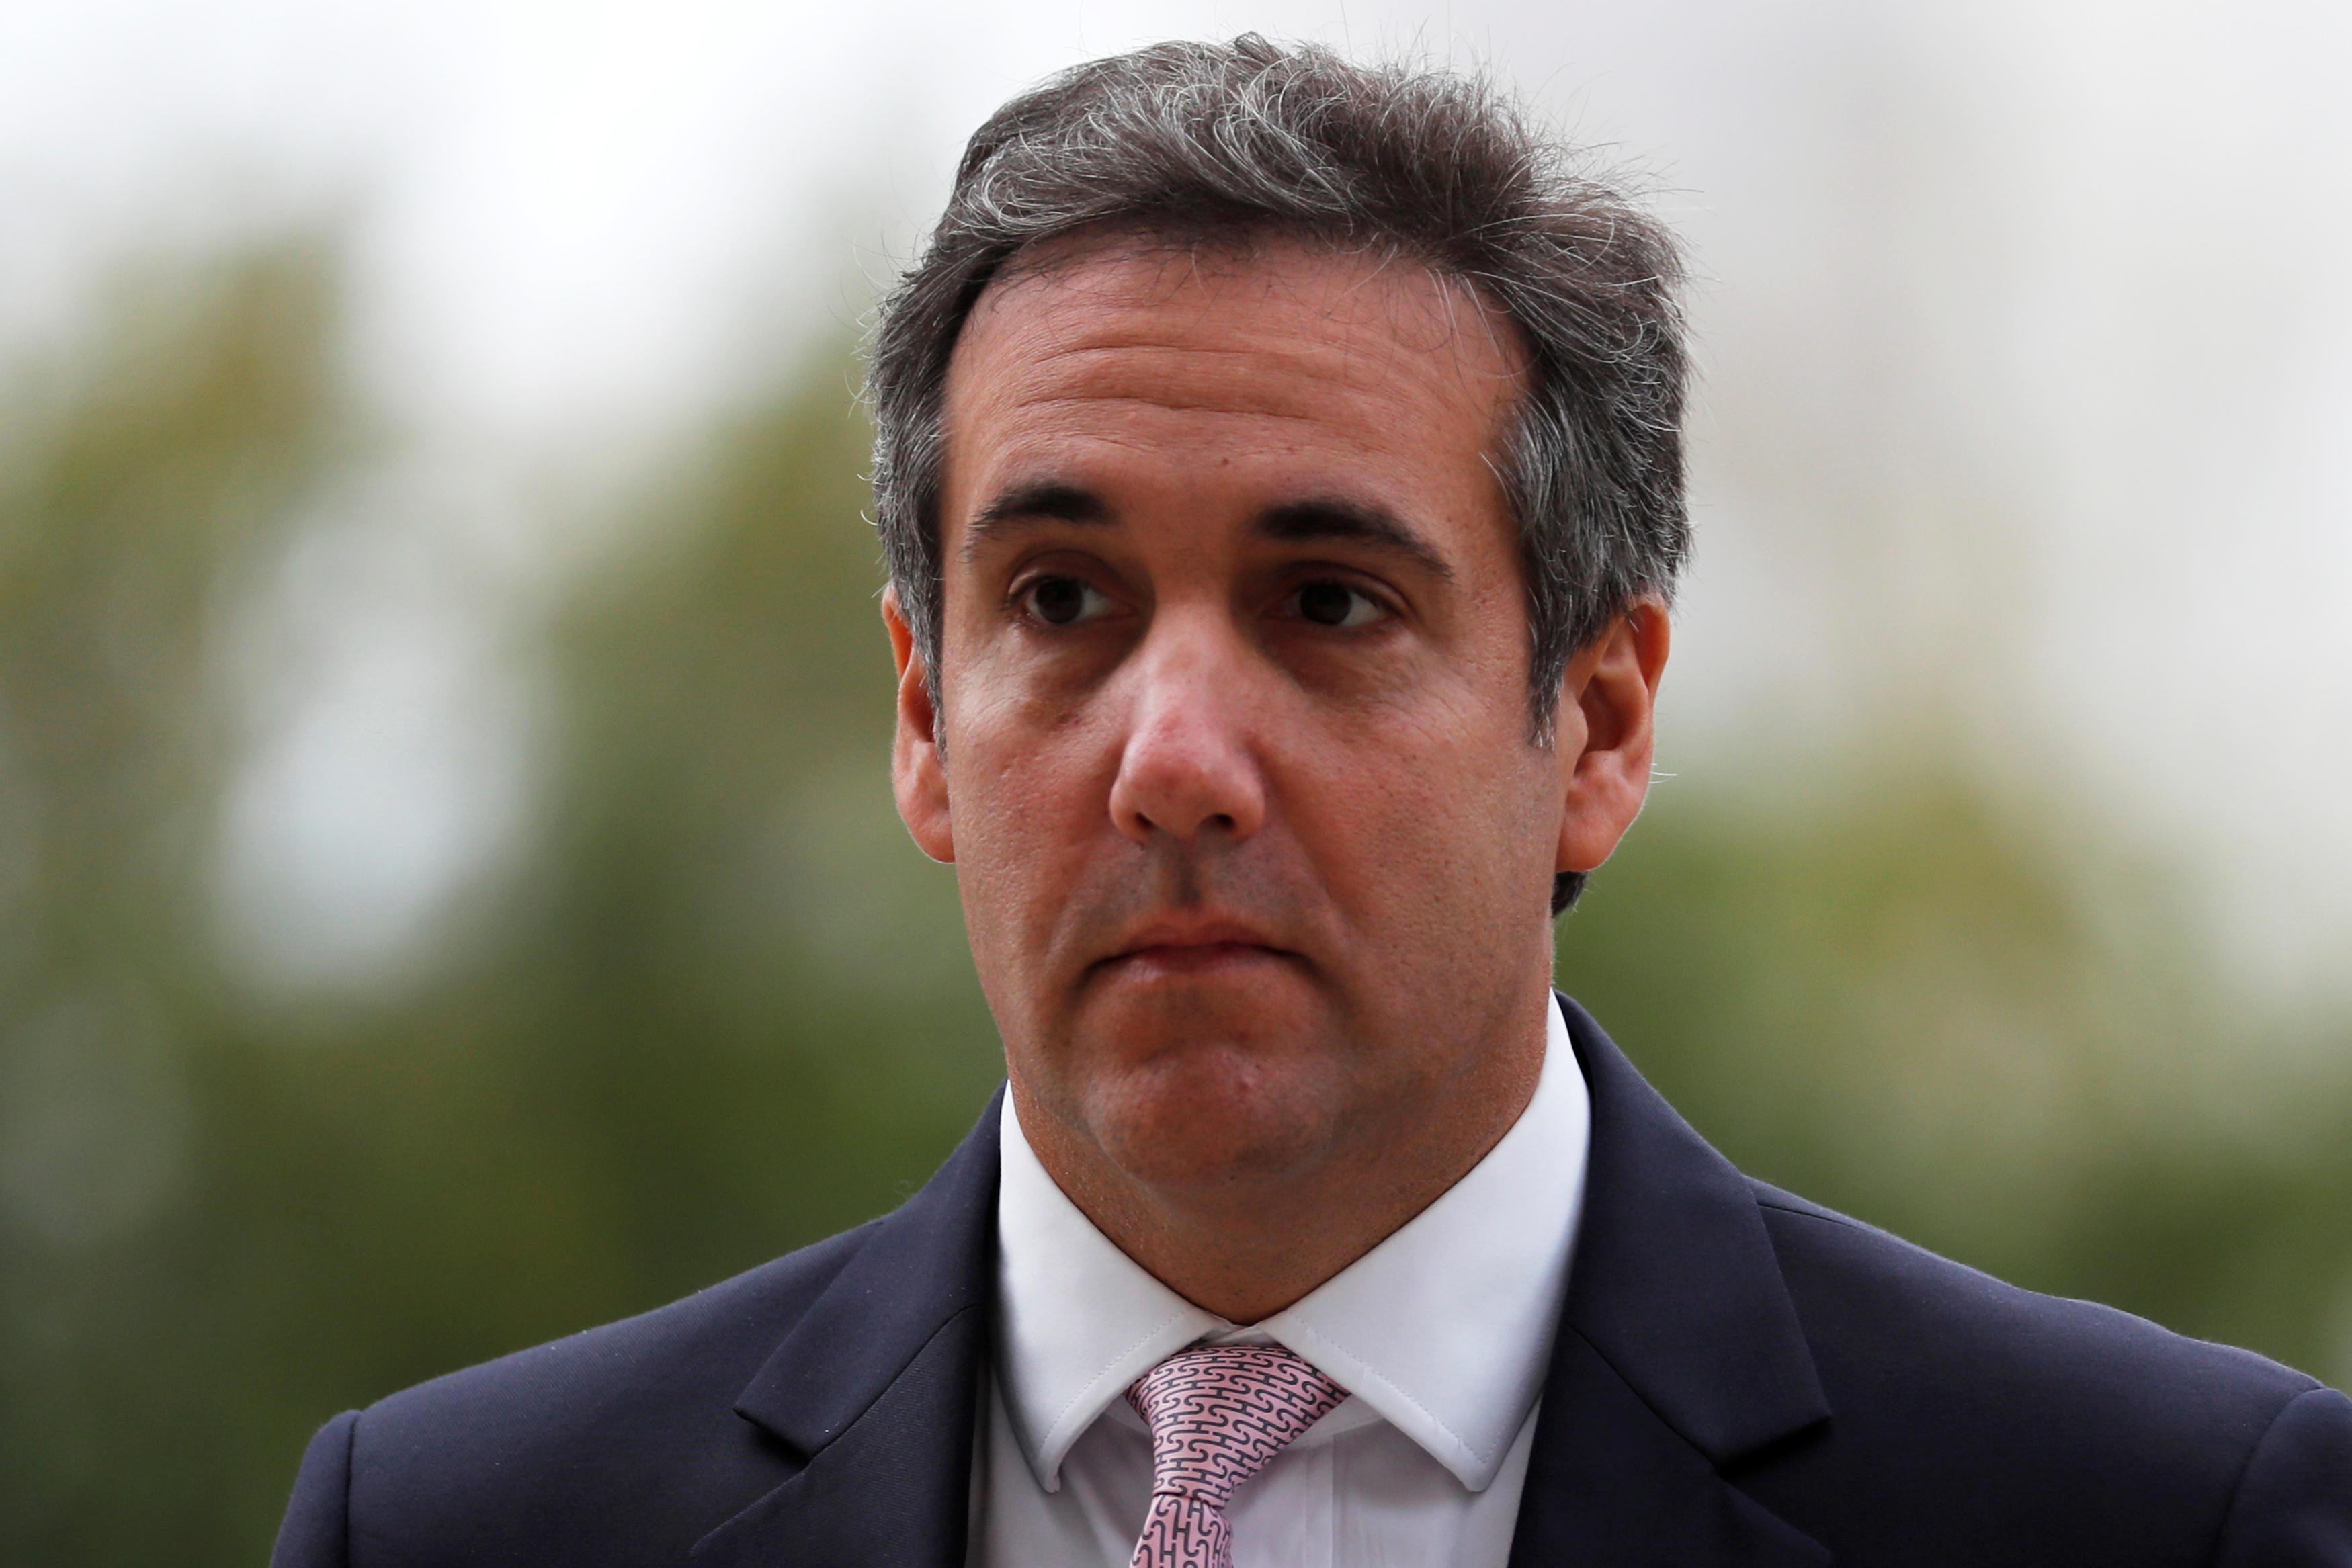 Payment Porn - Trump lawyer arranged hush money payment to porn star ...